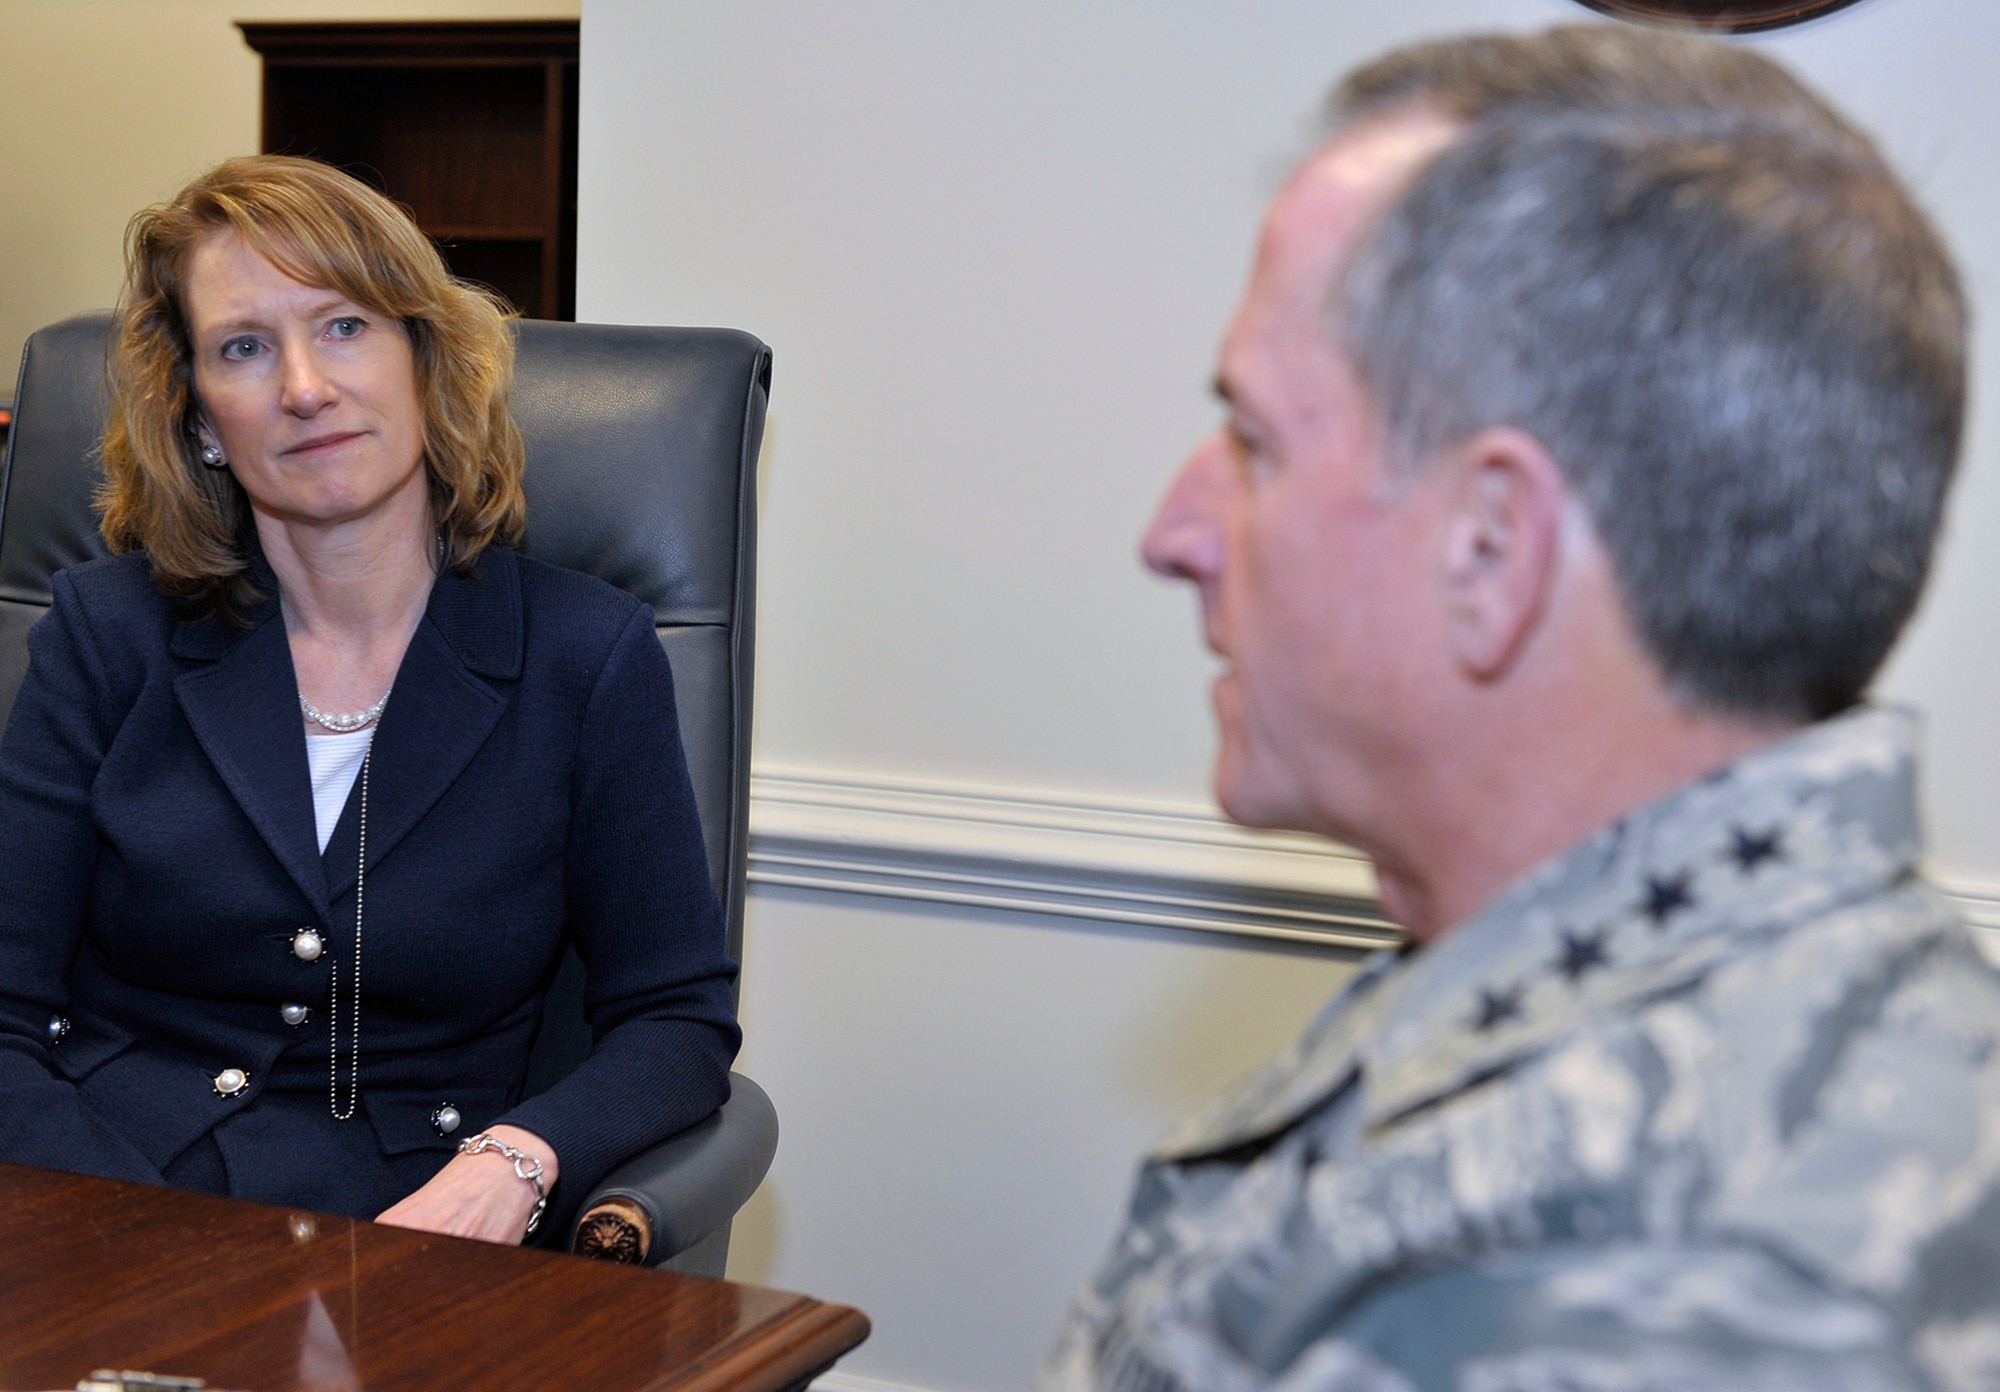 Acting Secretary of the Air Force Lisa Disbrow meets with Air Force Chief of Staff Gen. David L. Goldfein at the Pentagon, Jan. 23, 2017. Disbrow will serve as the acting secretary until the president nominates and the Senate confirms a full time successor. (U.S. Air Force photo/Tech. Sgt. Robert Barnett)